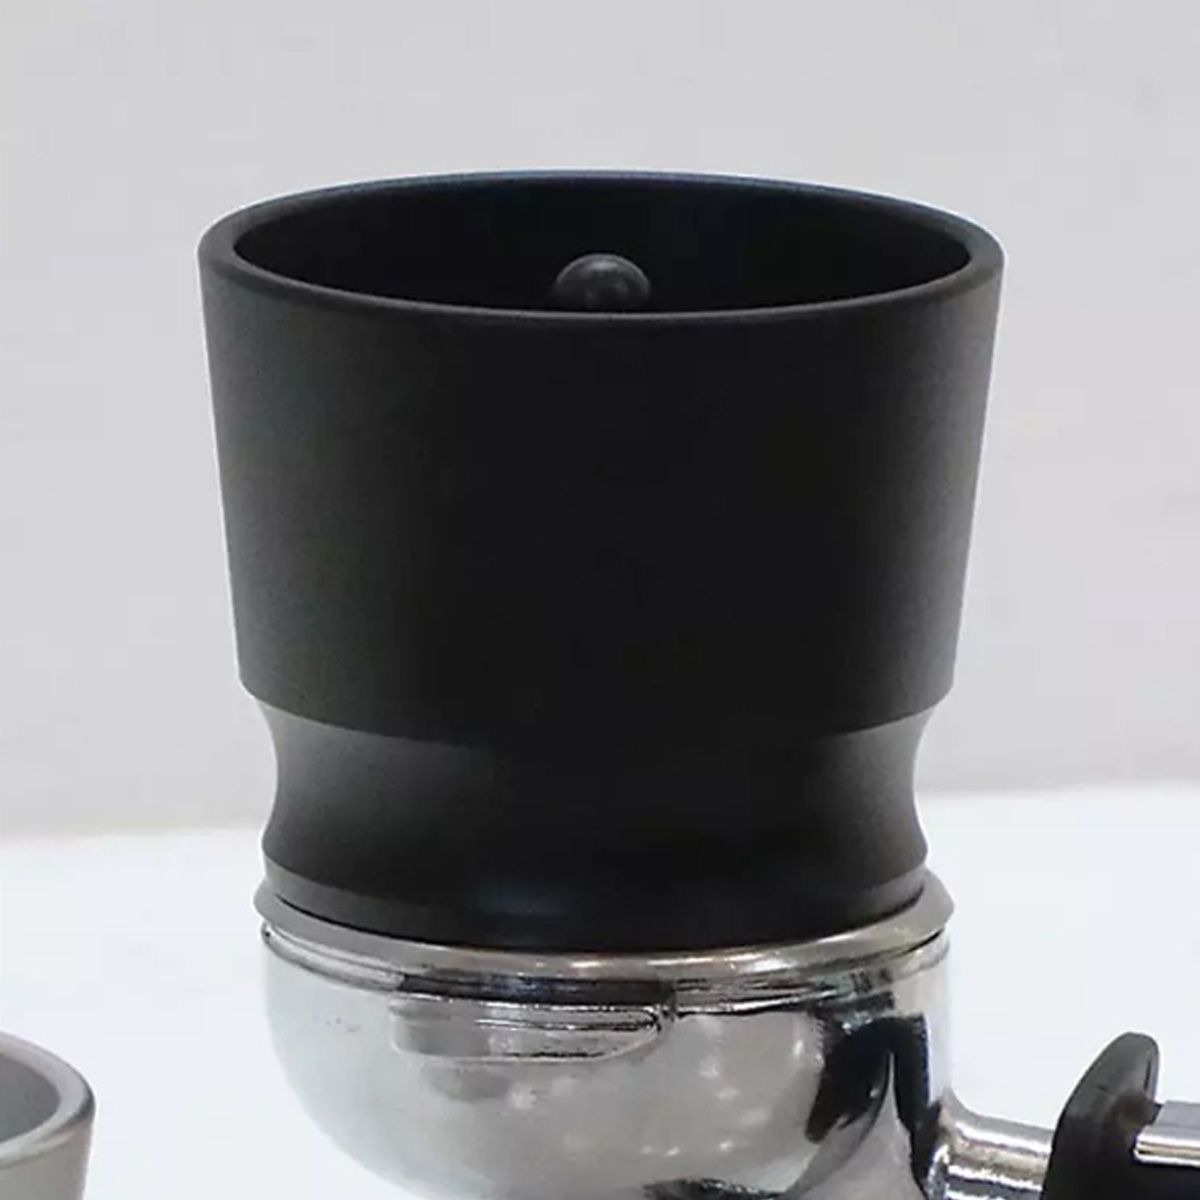 Aluminum-Dosing-Ring-for-Brewing-Bowl-Coffee-Powder-for-58MM-Coffee-Tamper-1459974